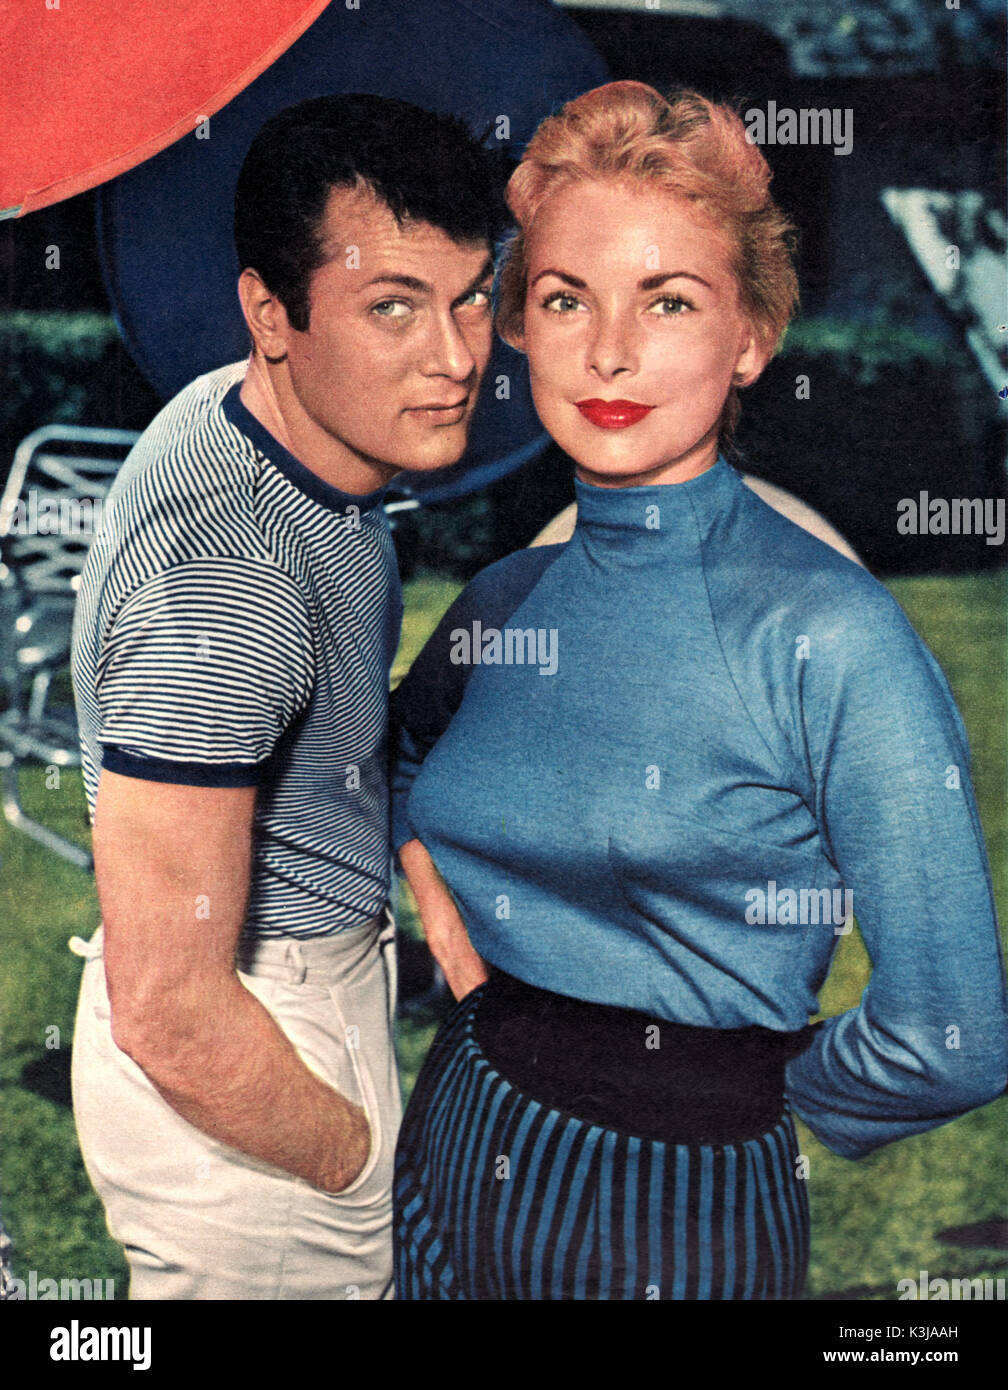 TONY CURTIS & JANET LEIGH Married 1951 - 1962 TONY CURTIS & JANET LEIGH Married 1951 - 1962 Stock Photo